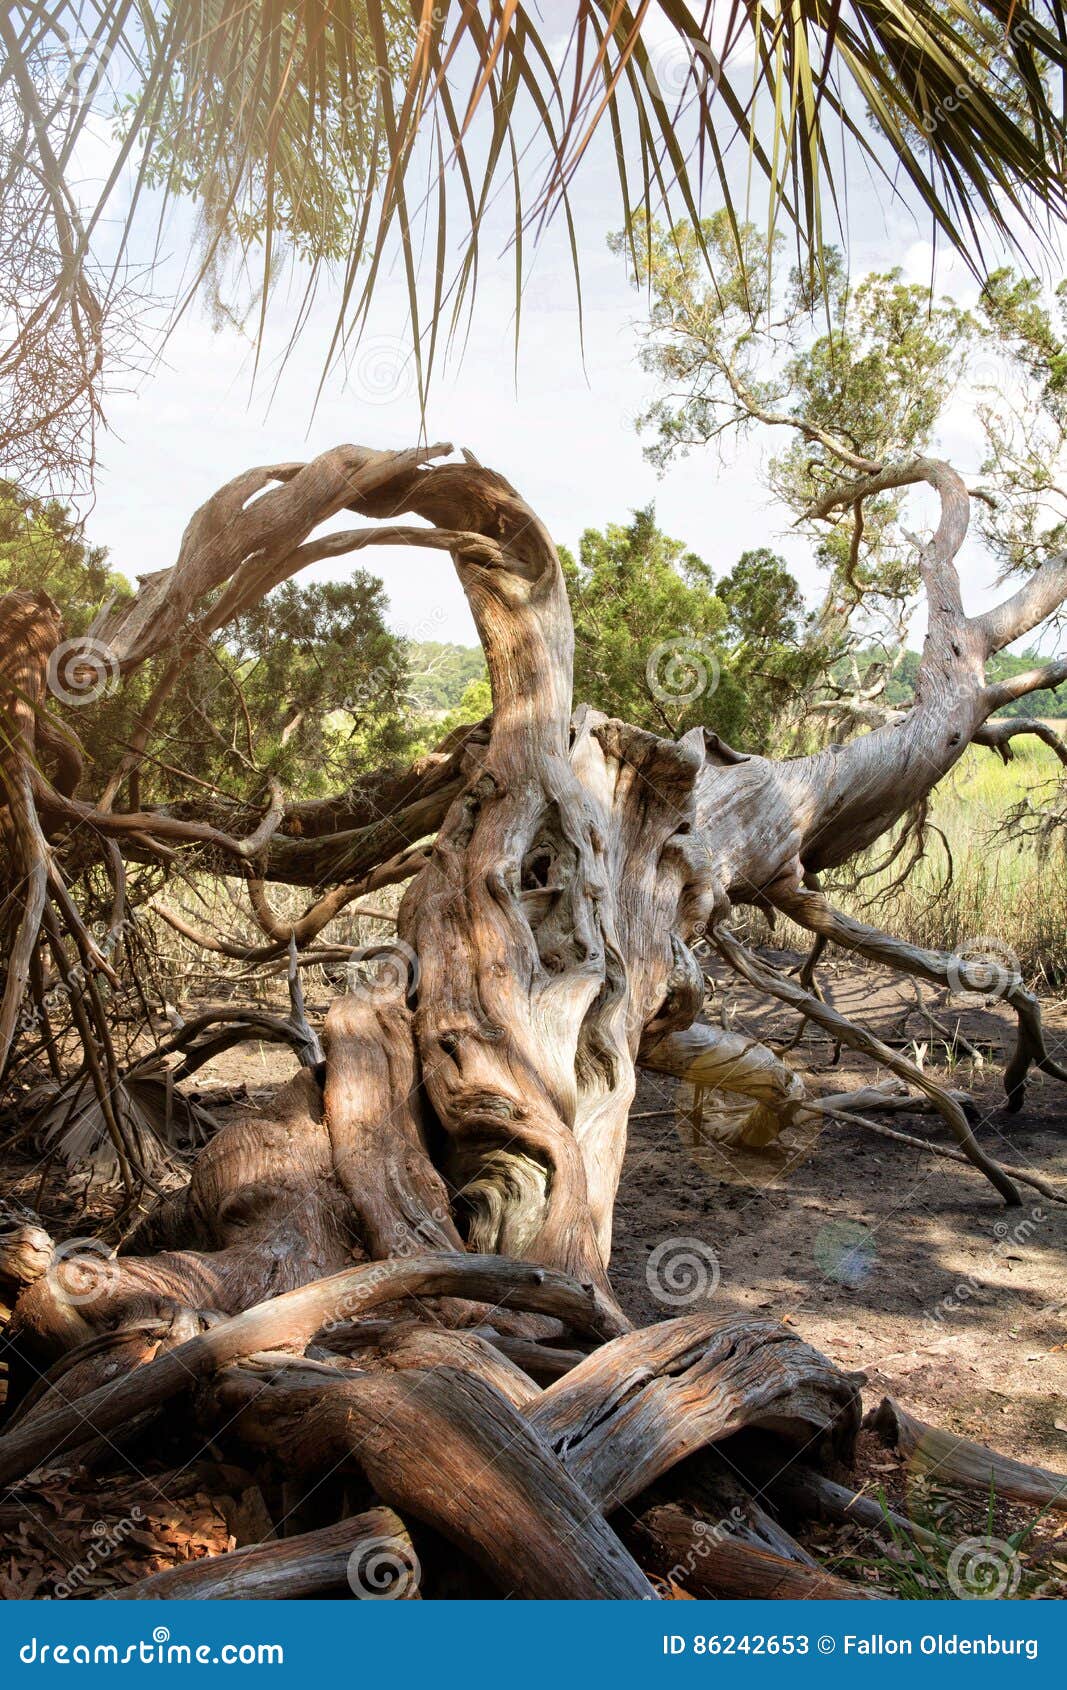 gnarly tree in the swamplands